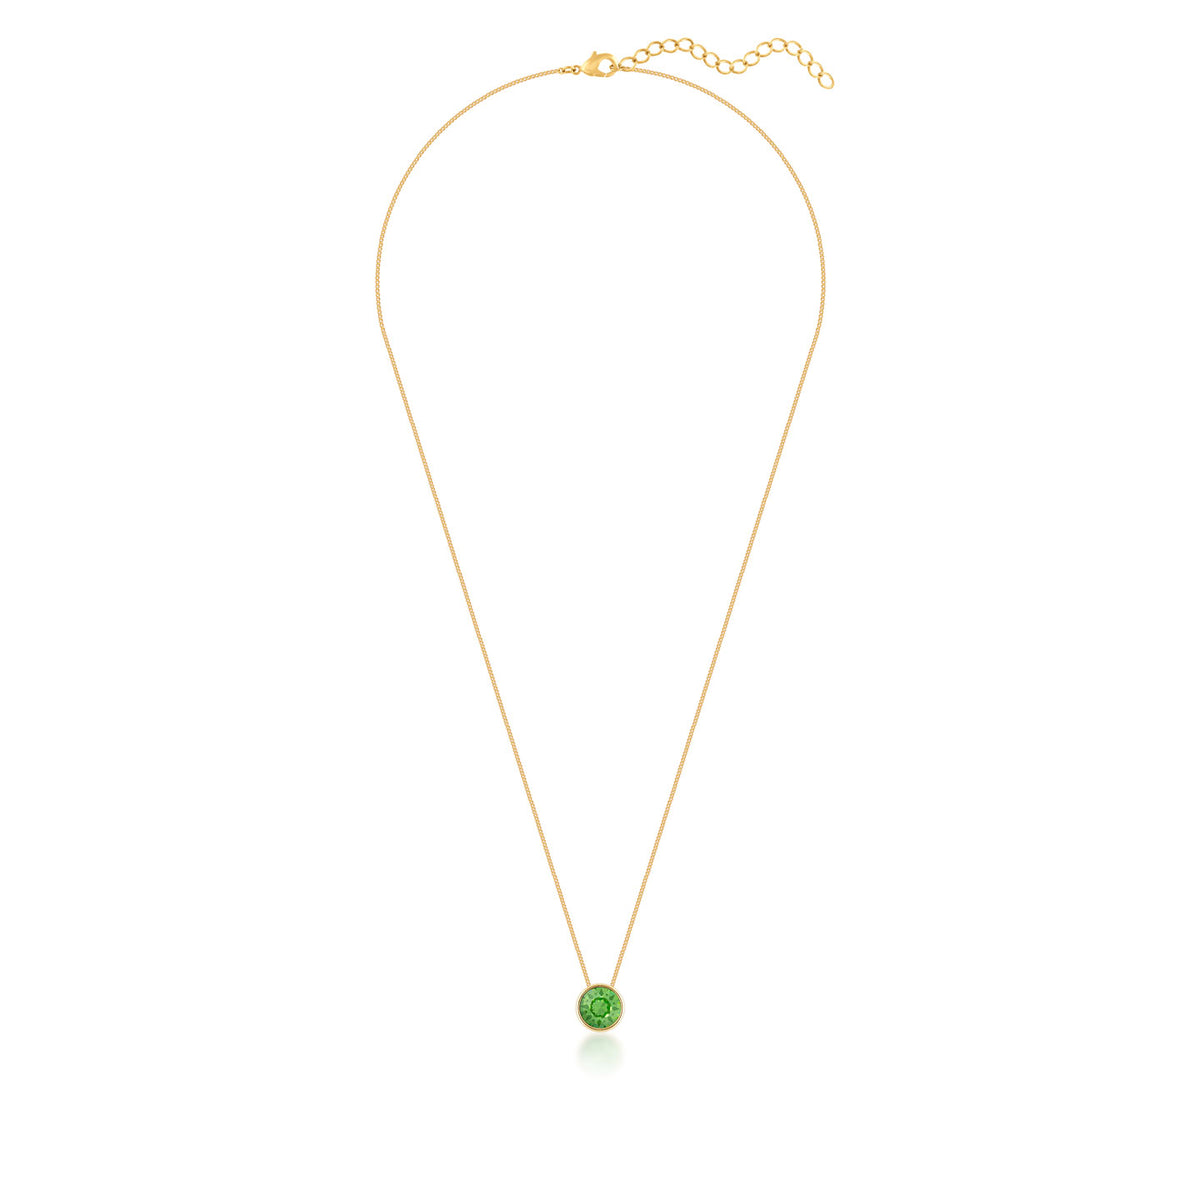 Harley Small Pendant Necklace with Green Peridot Round Crystals from Swarovski Gold Plated - Ed Heart